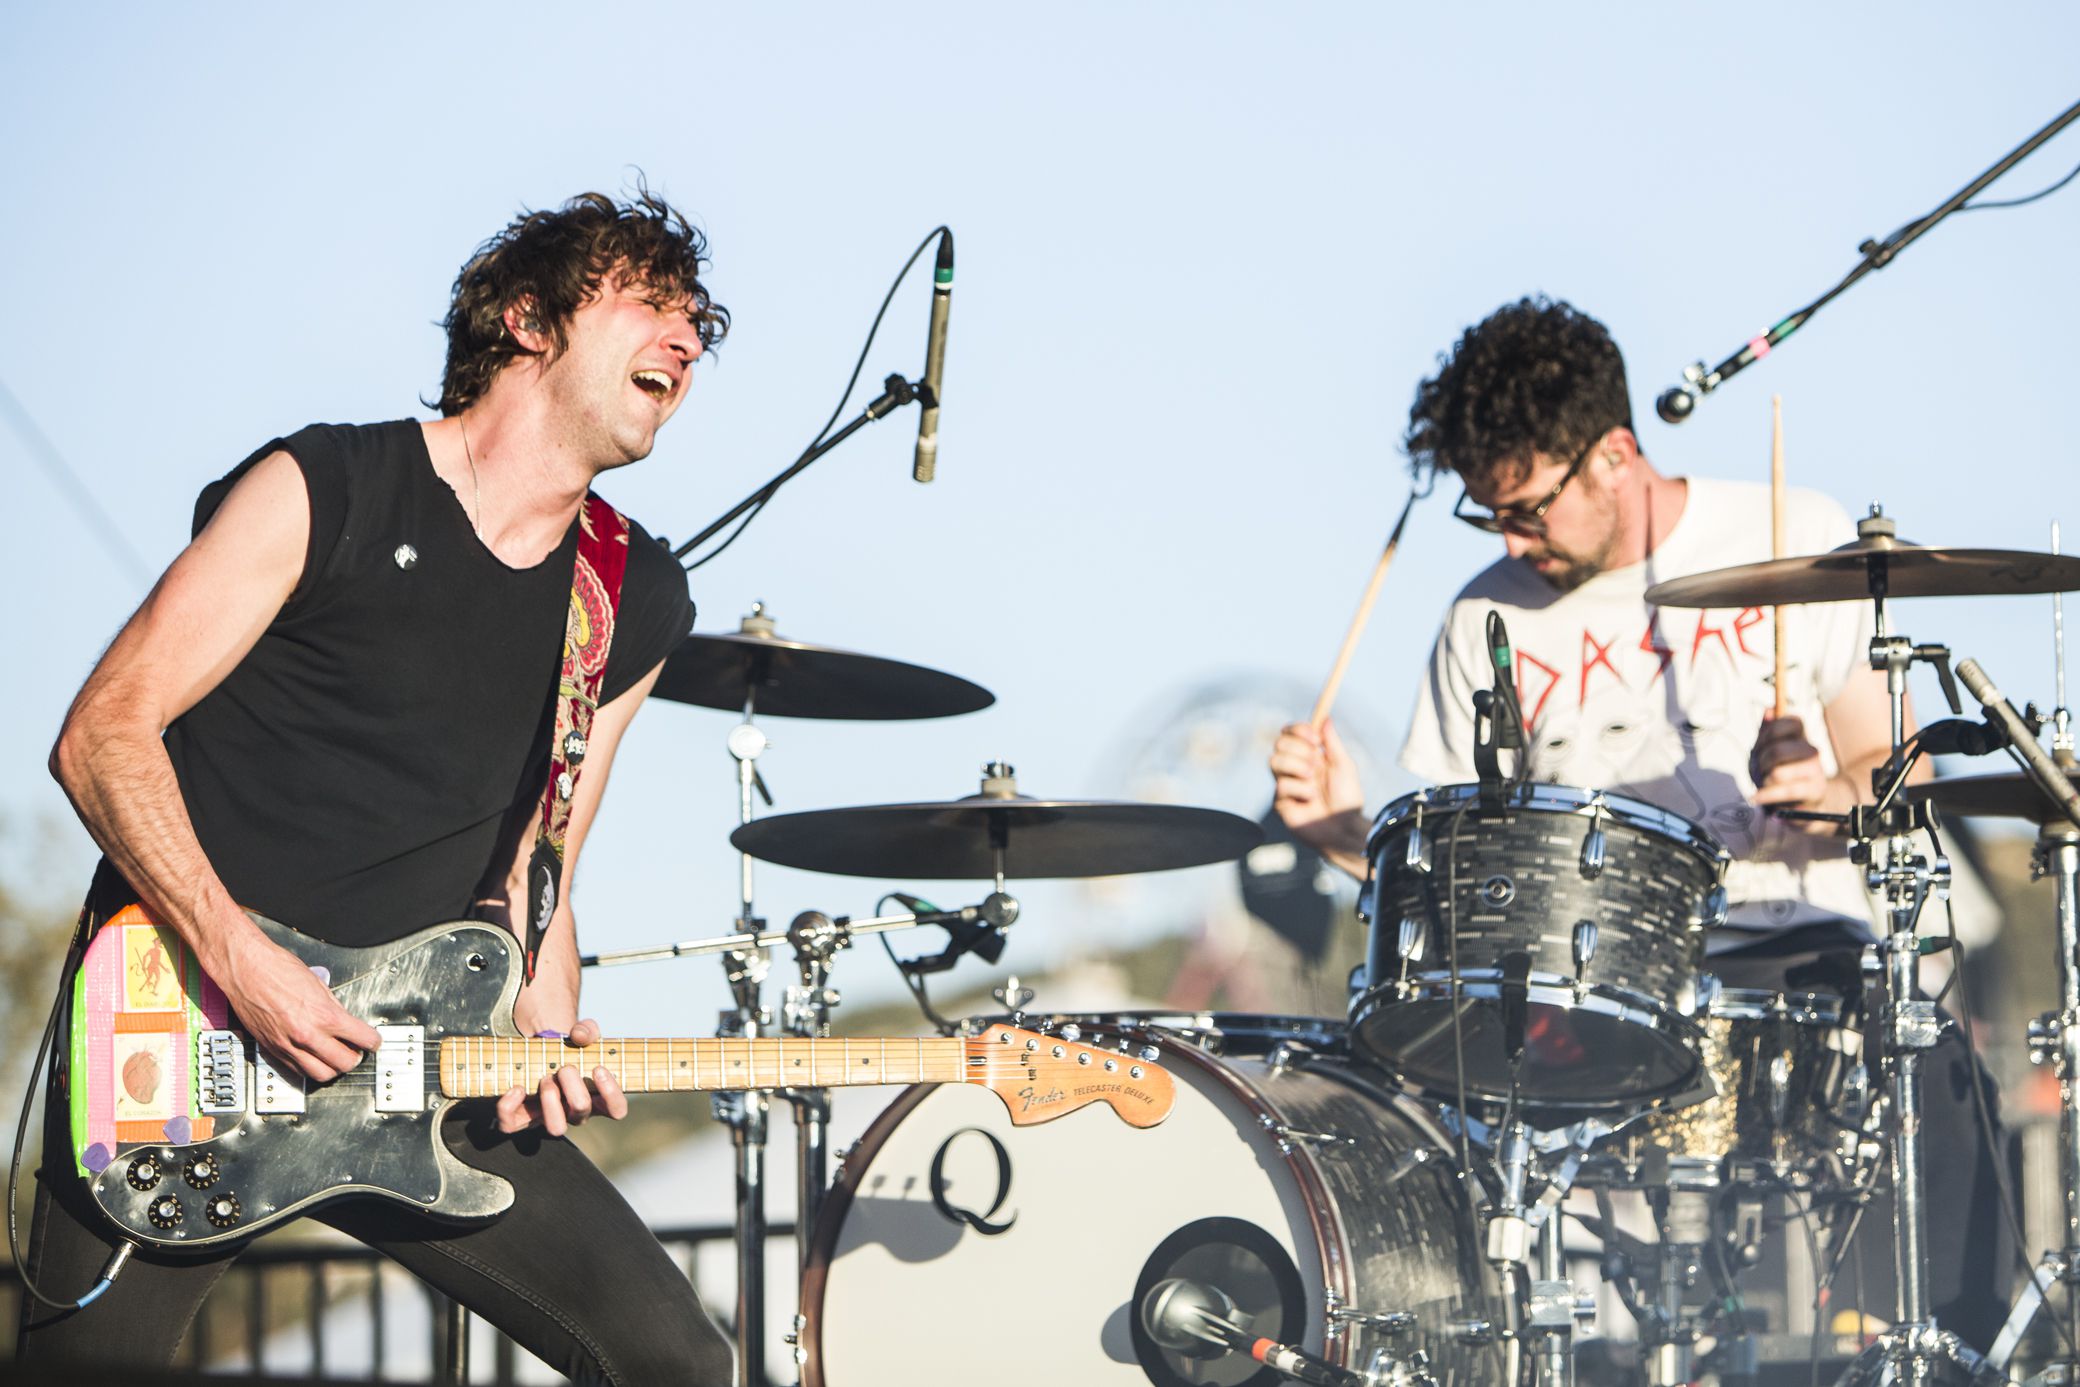 japandroids 6 Cal Jam Offered Everything Youd Want From Dave Grohl